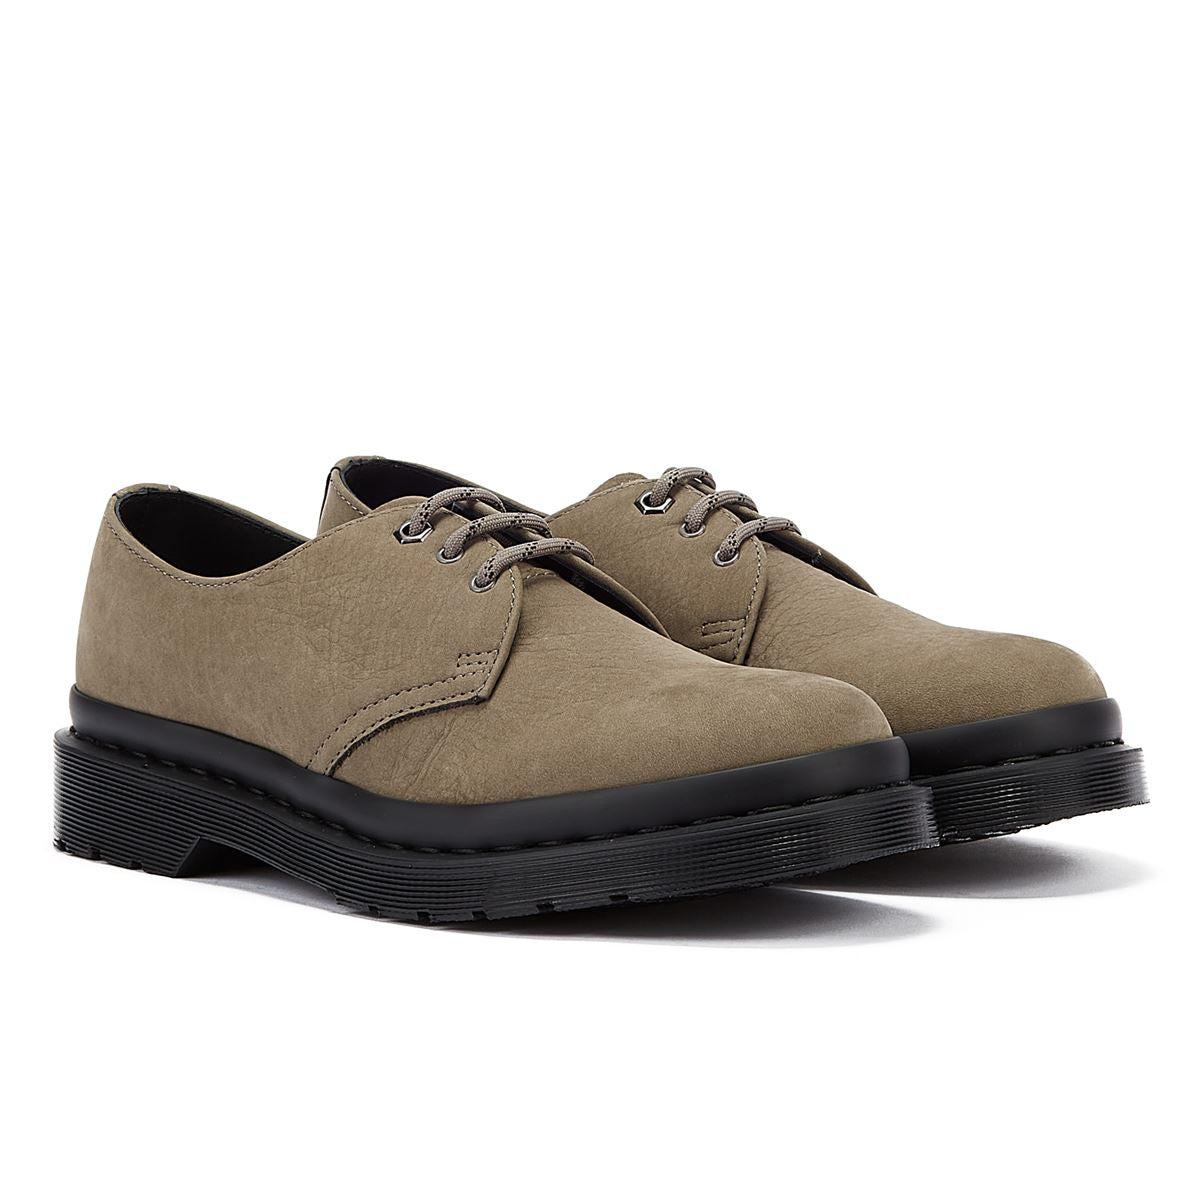 Dr. Martens 1461 Milled Nubuck Wp Grey Lace-Up Shoes